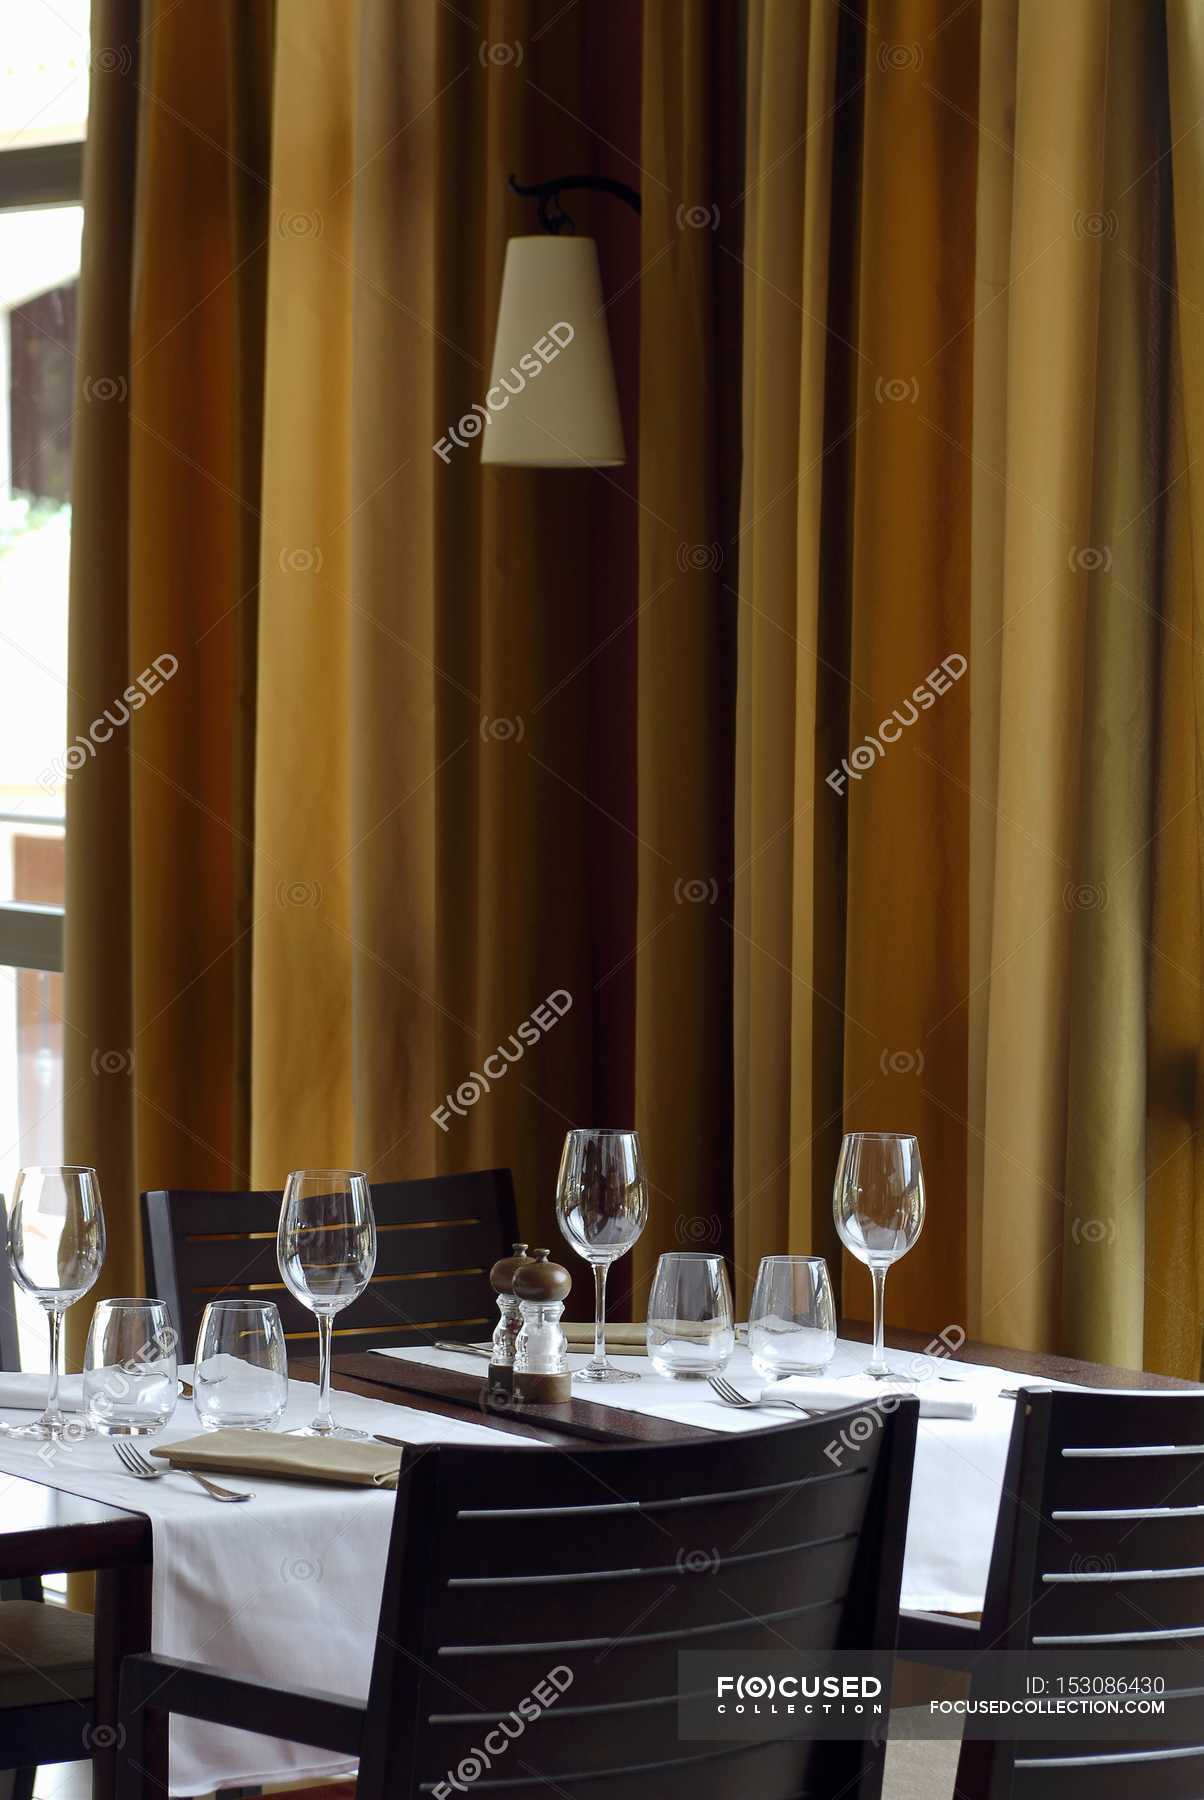 Laid table in a restaurant with curtains on a background — torch, natural  light - Stock Photo | #153086430